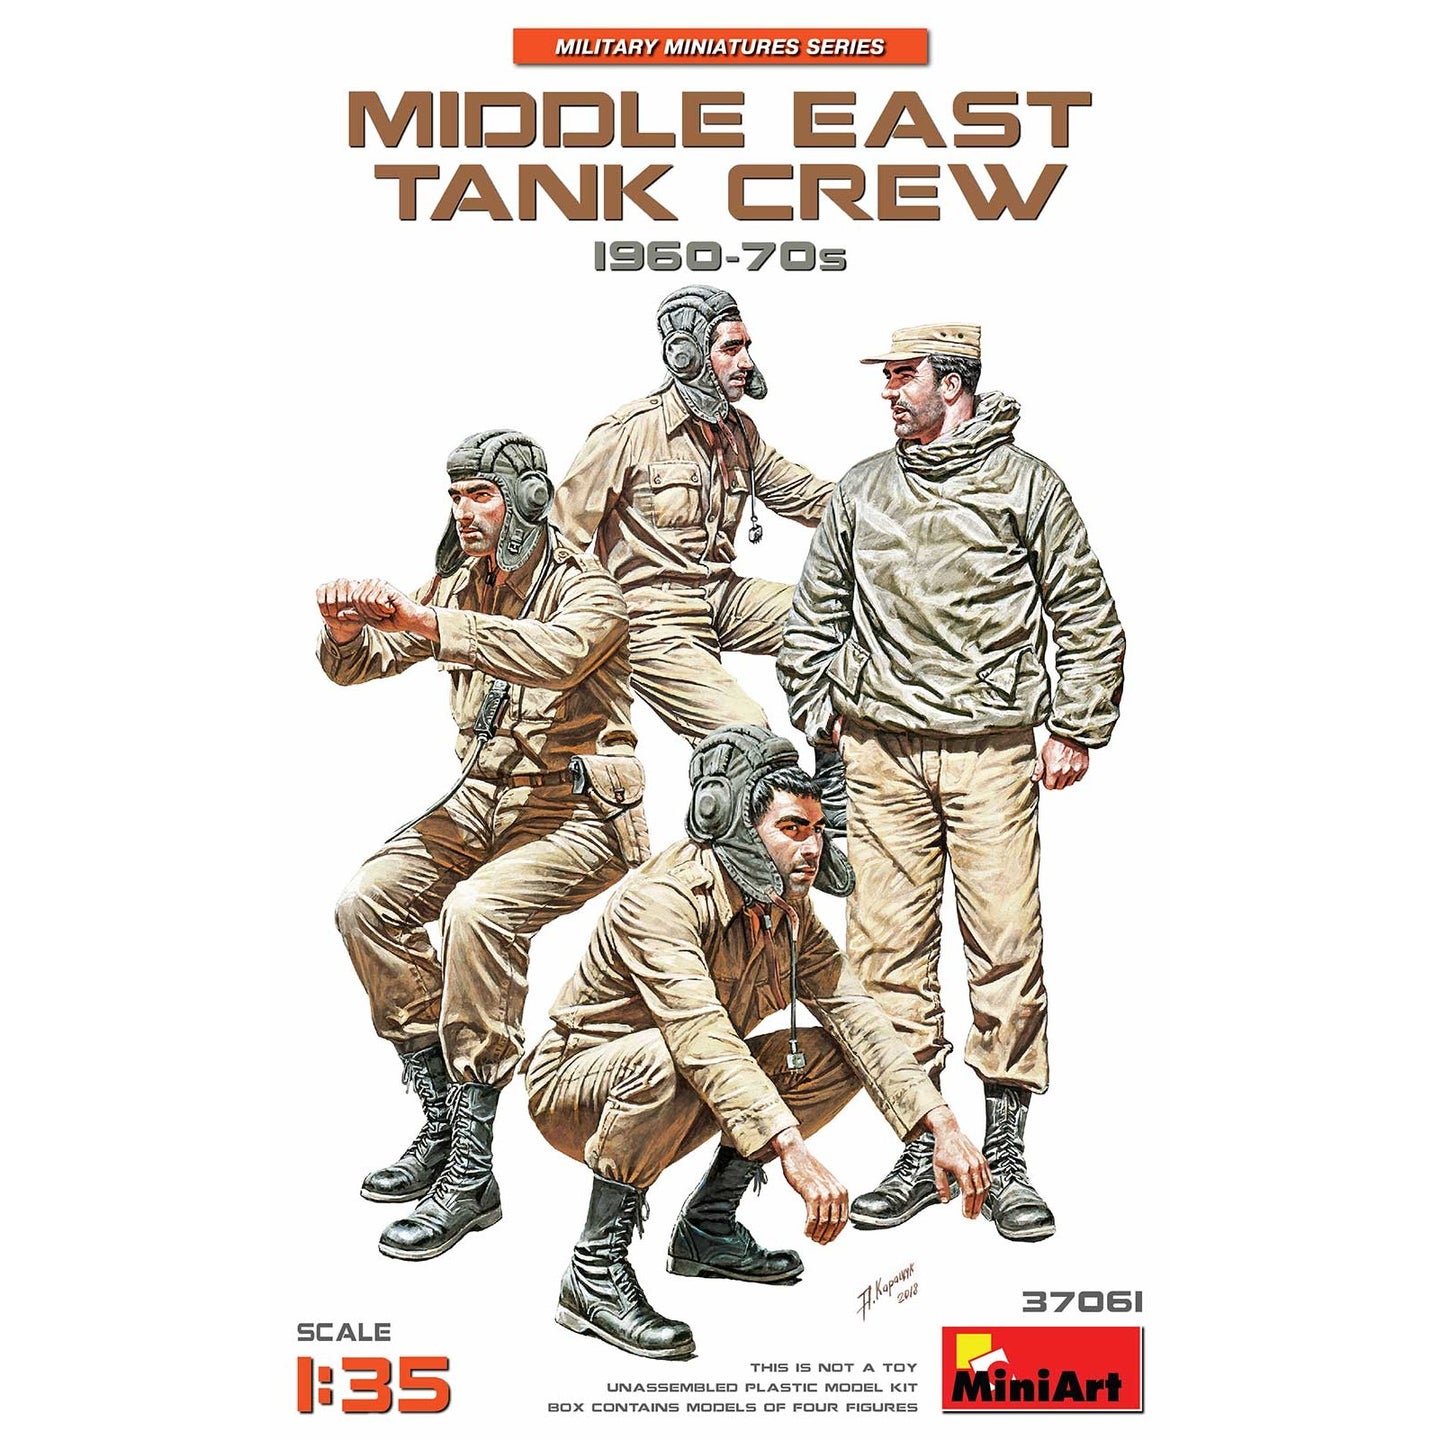 MiniArt 1/35 Middle East Tank Crew 1960-70s 37061